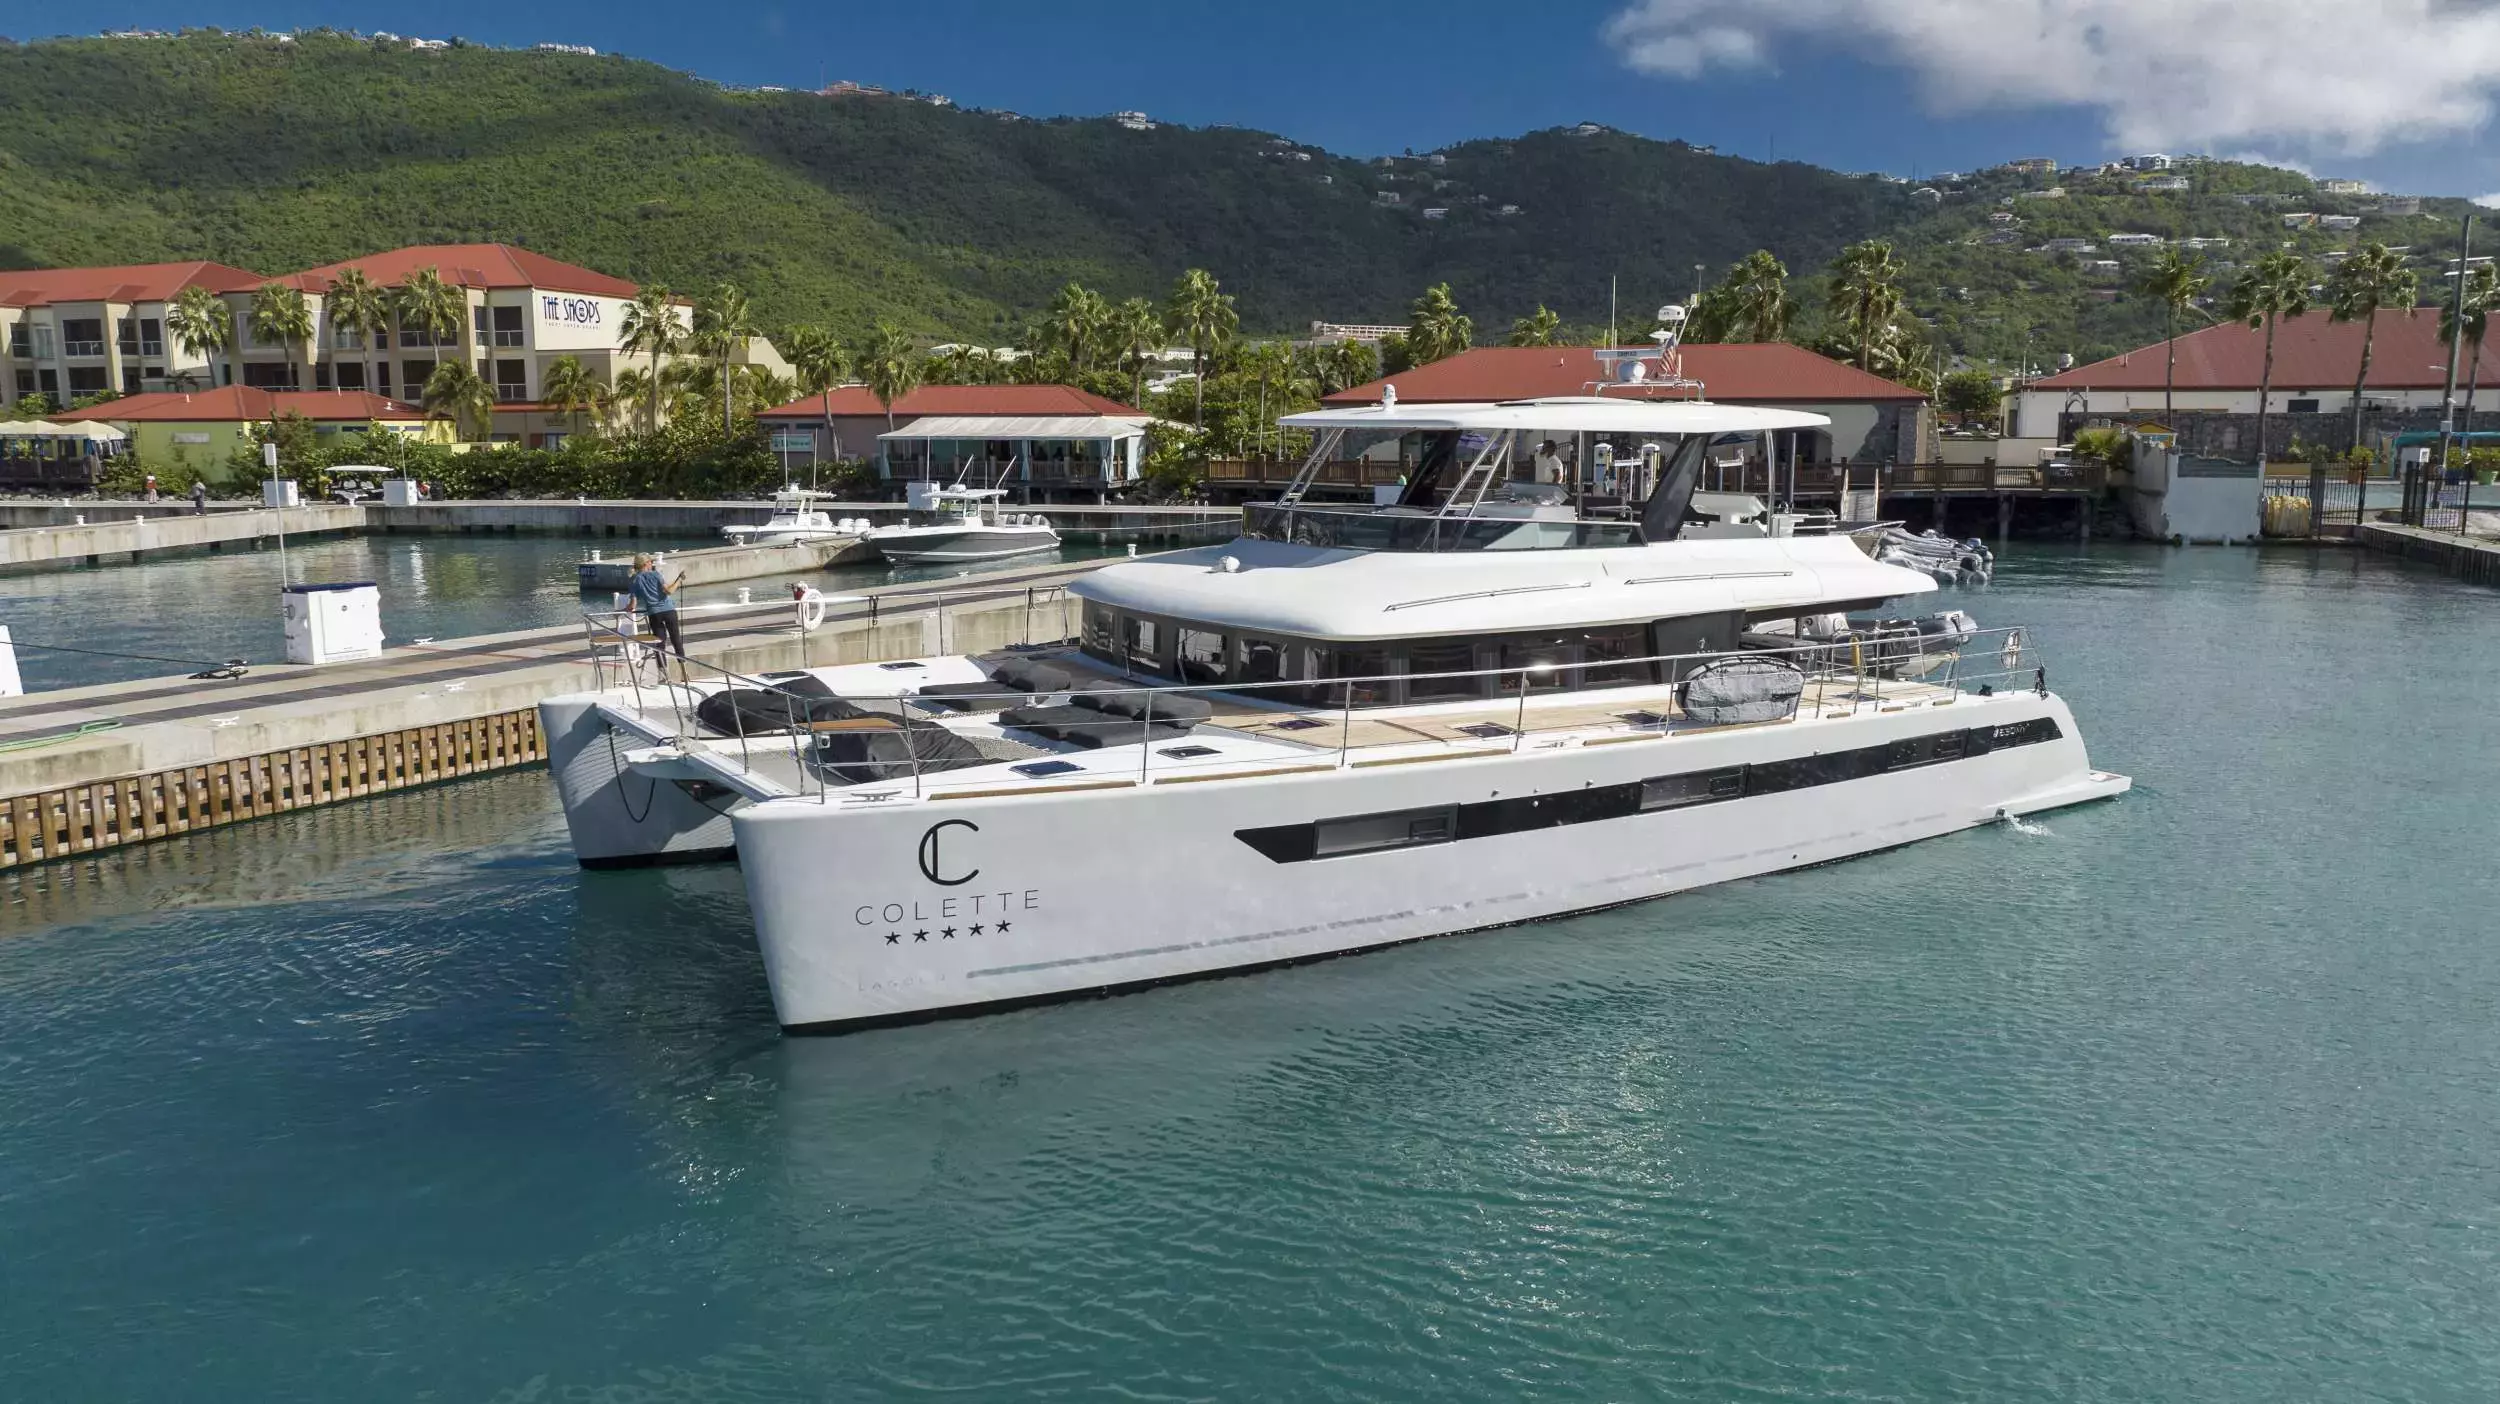 Colette by Lagoon - Top rates for a Rental of a private Power Catamaran in British Virgin Islands